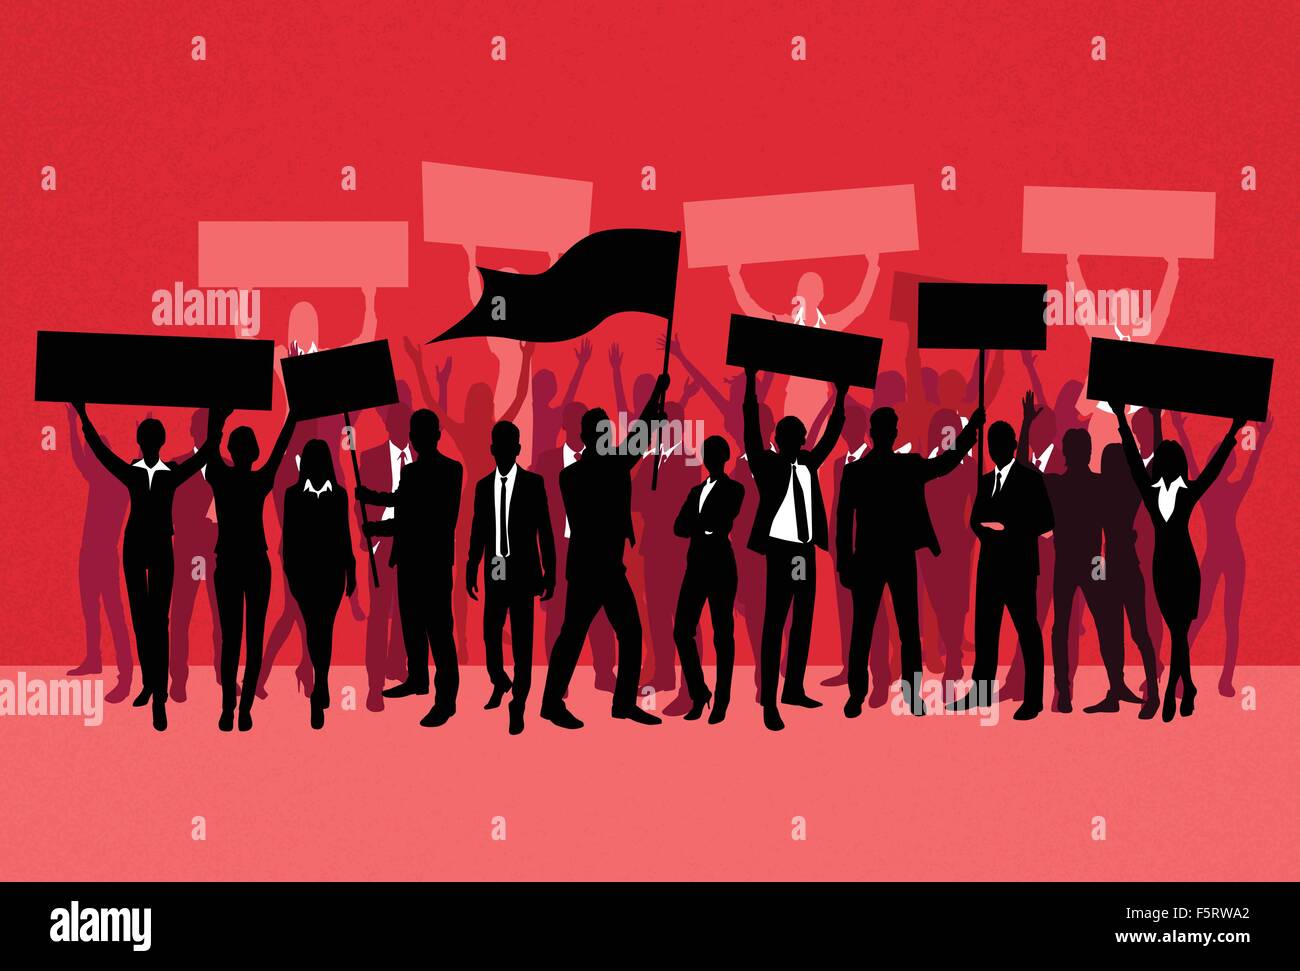 Protest People Crowd Silhouette Over Red Background Stock Vector